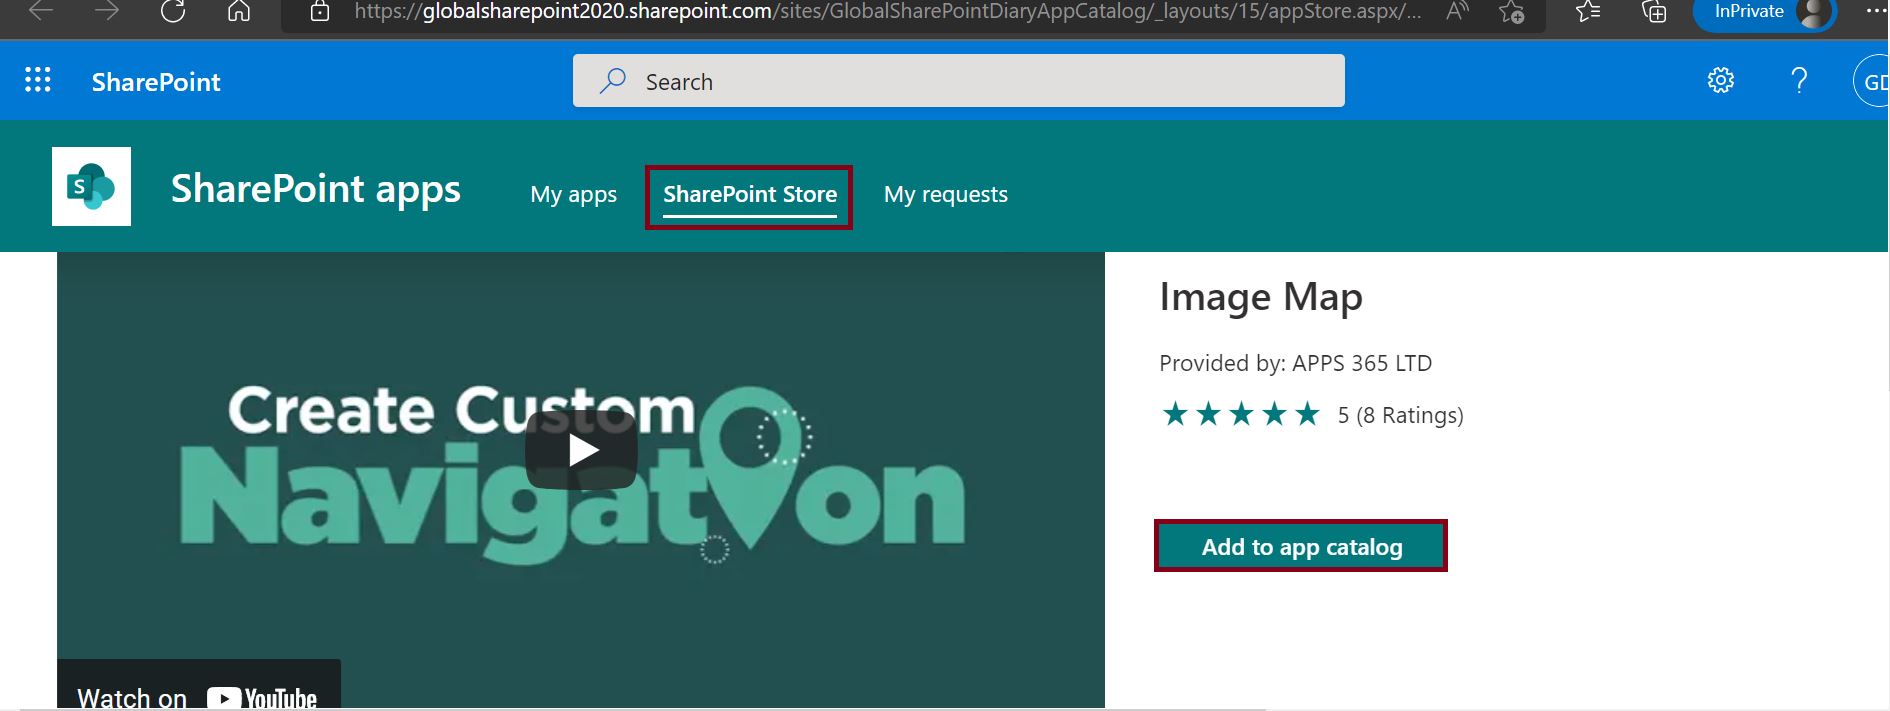 Add Image Map App to App Catalog site